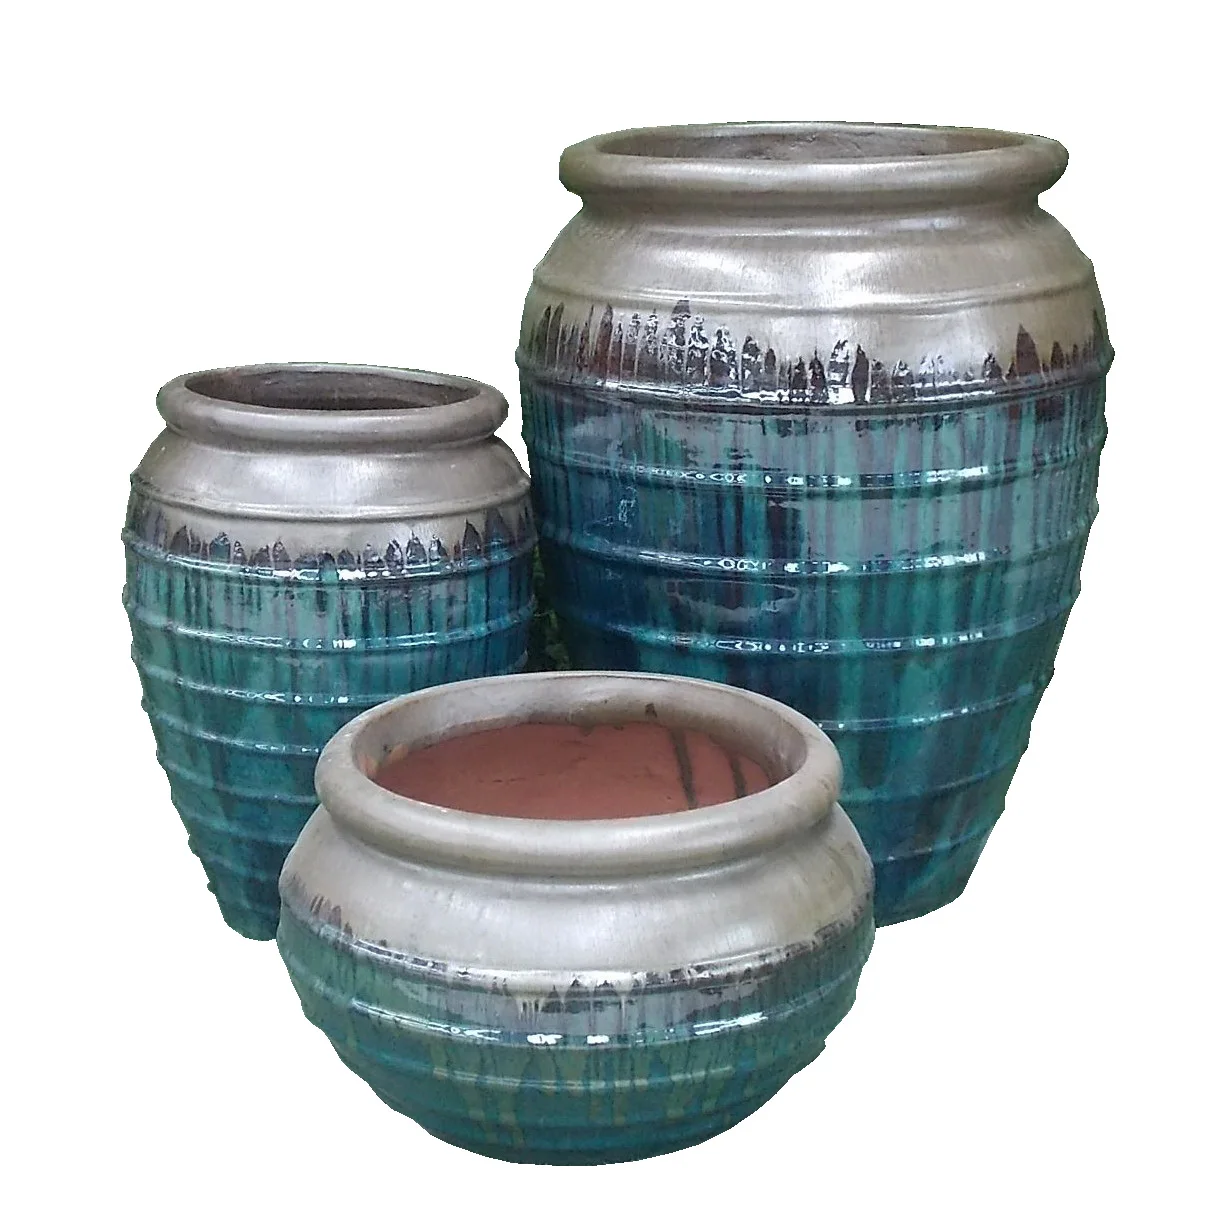 Wholesale European-Style Ceramic Flower Planters Outdoor Glazed Pottery Pots for Garden Planting for Shopping Mall Use Floor